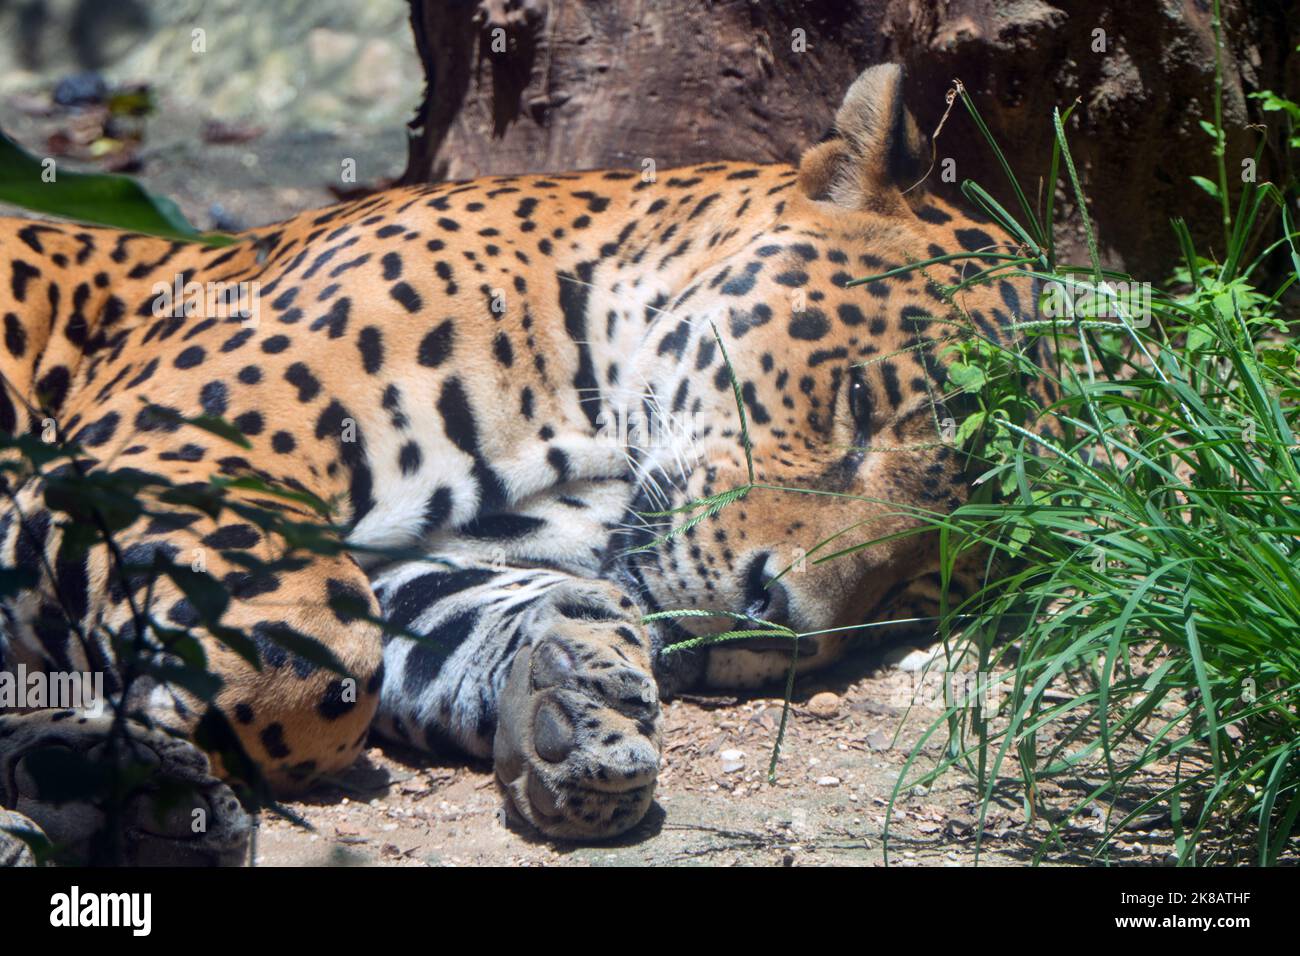 Large male jaguar in zoo cage in Chiapas, Mexico. Big cat (Panthera onca) sleeping in enclosure Stock Photo